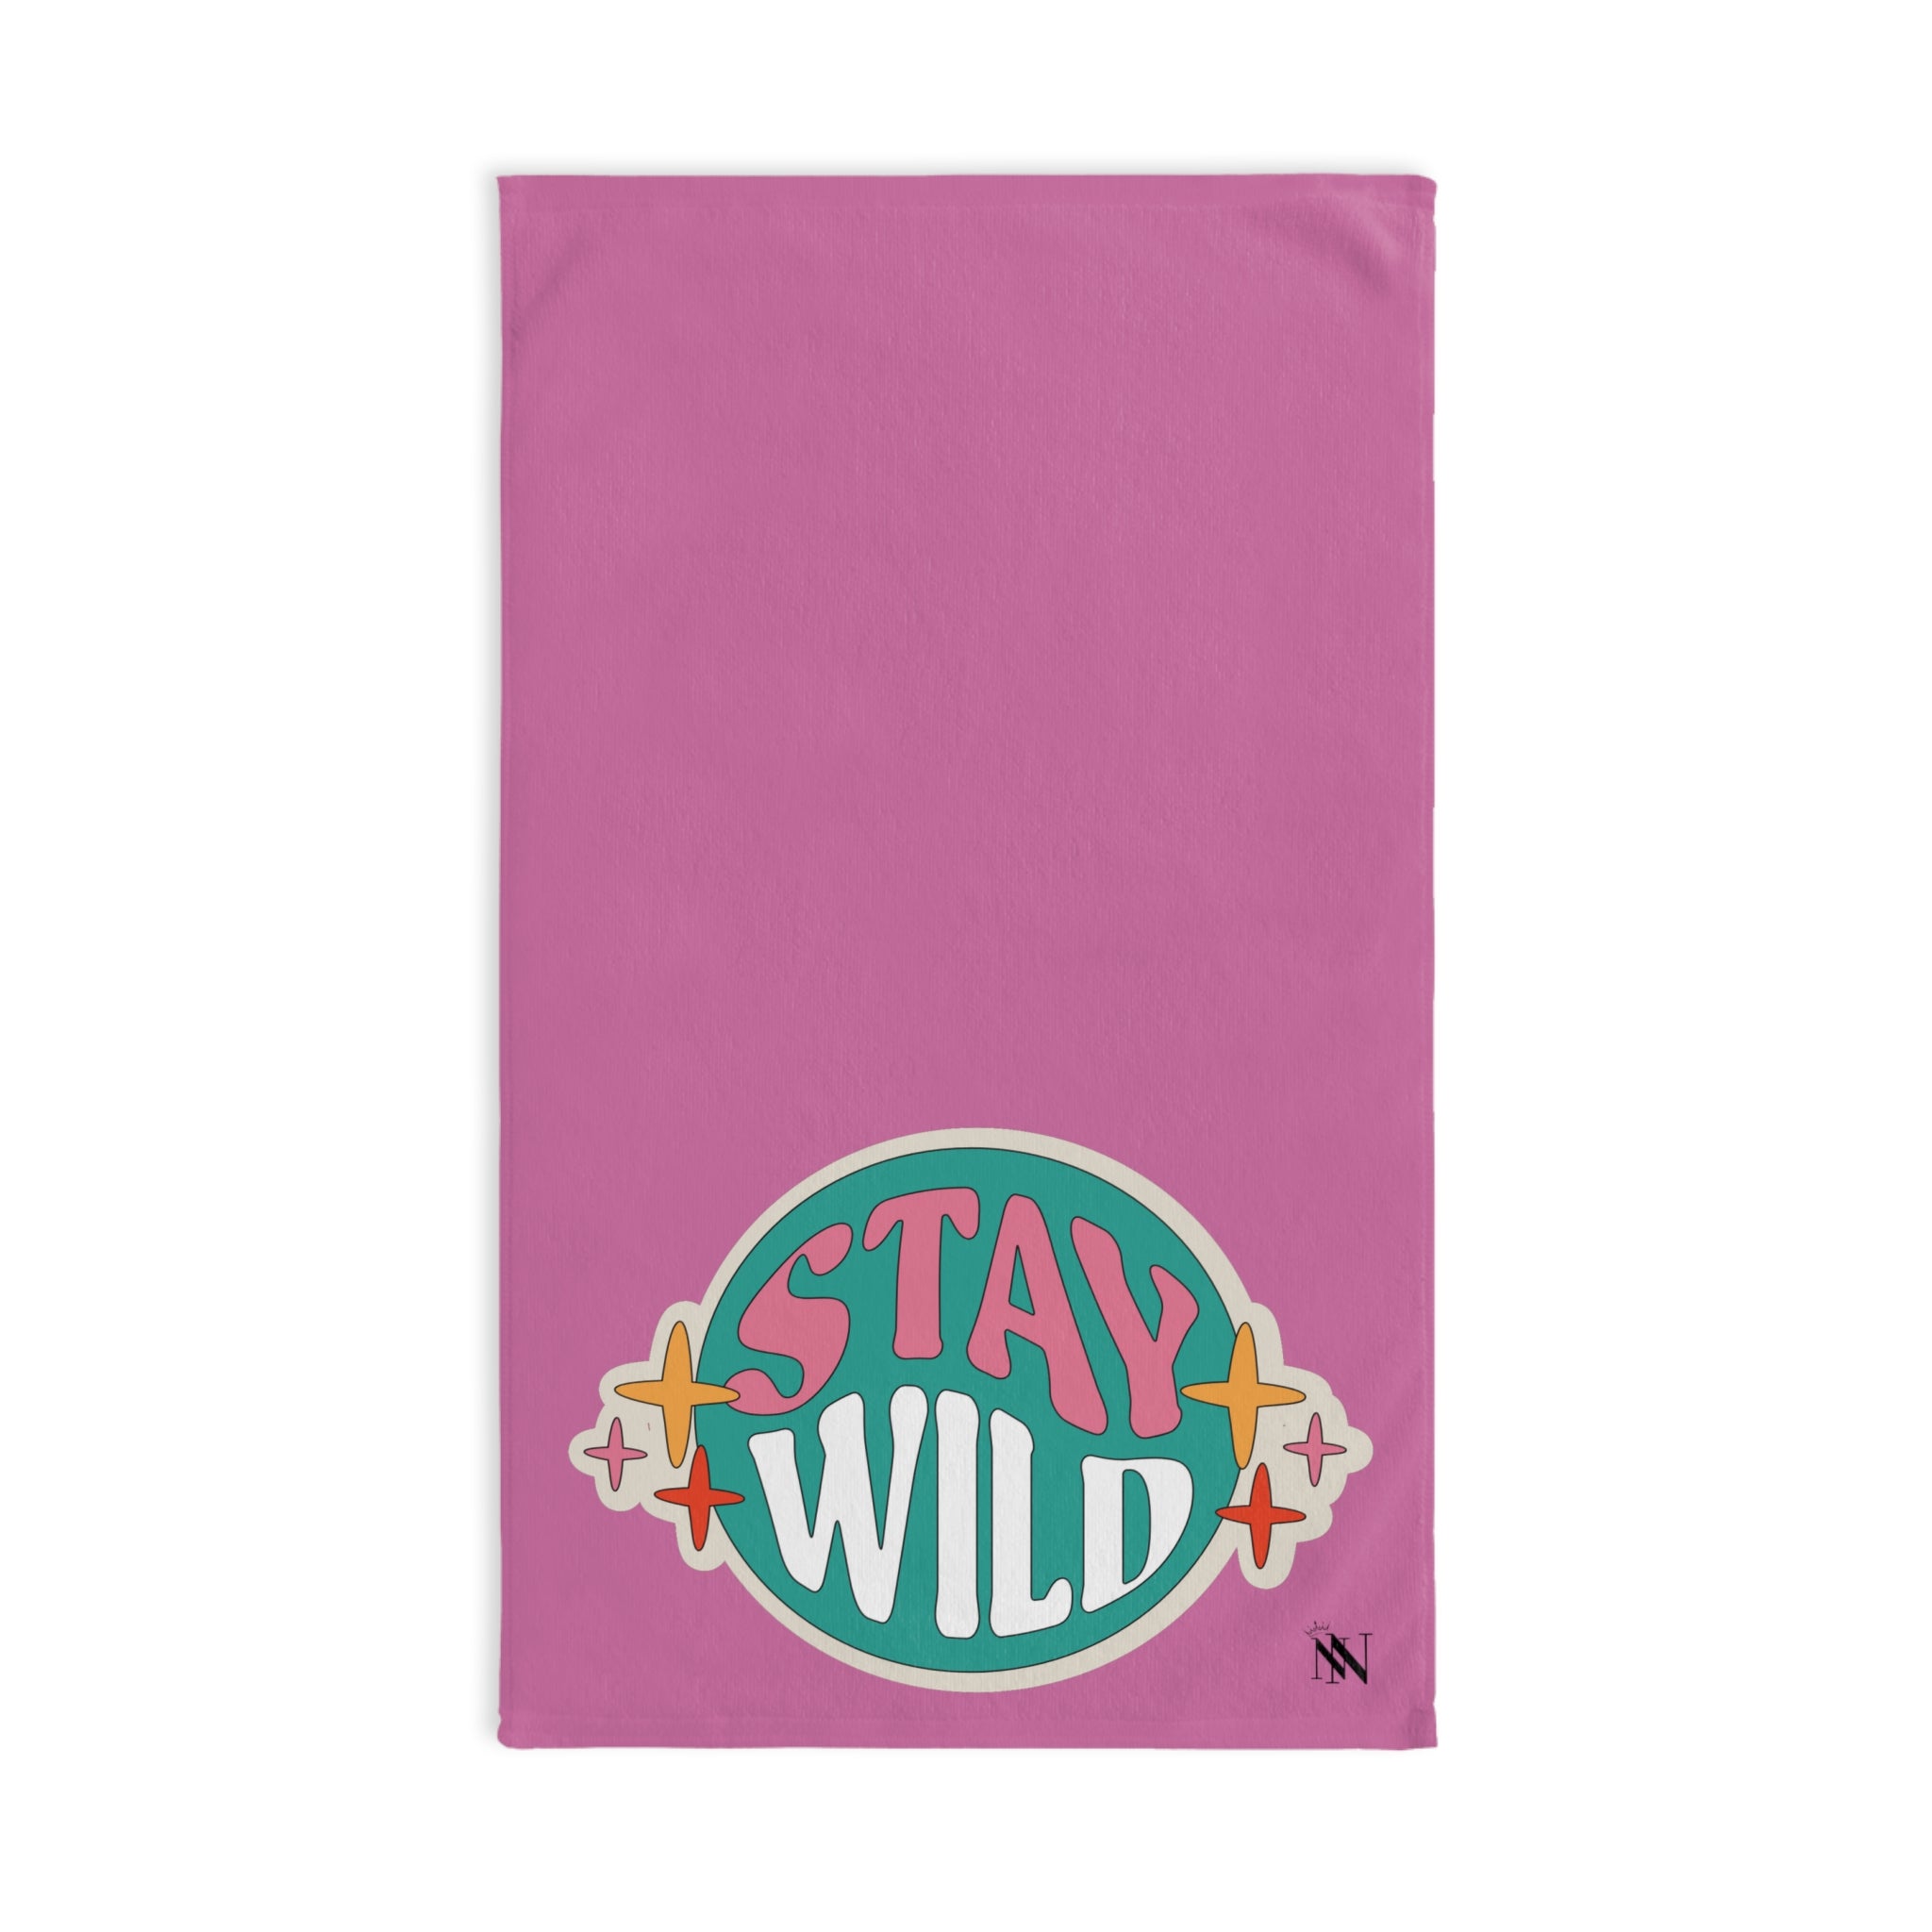 Stay Wild Boho RetroPink | Novelty Gifts for Boyfriend, Funny Towel Romantic Gift for Wedding Couple Fiance First Year Anniversary Valentines, Party Gag Gifts, Joke Humor Cloth for Husband Men BF NECTAR NAPKINS